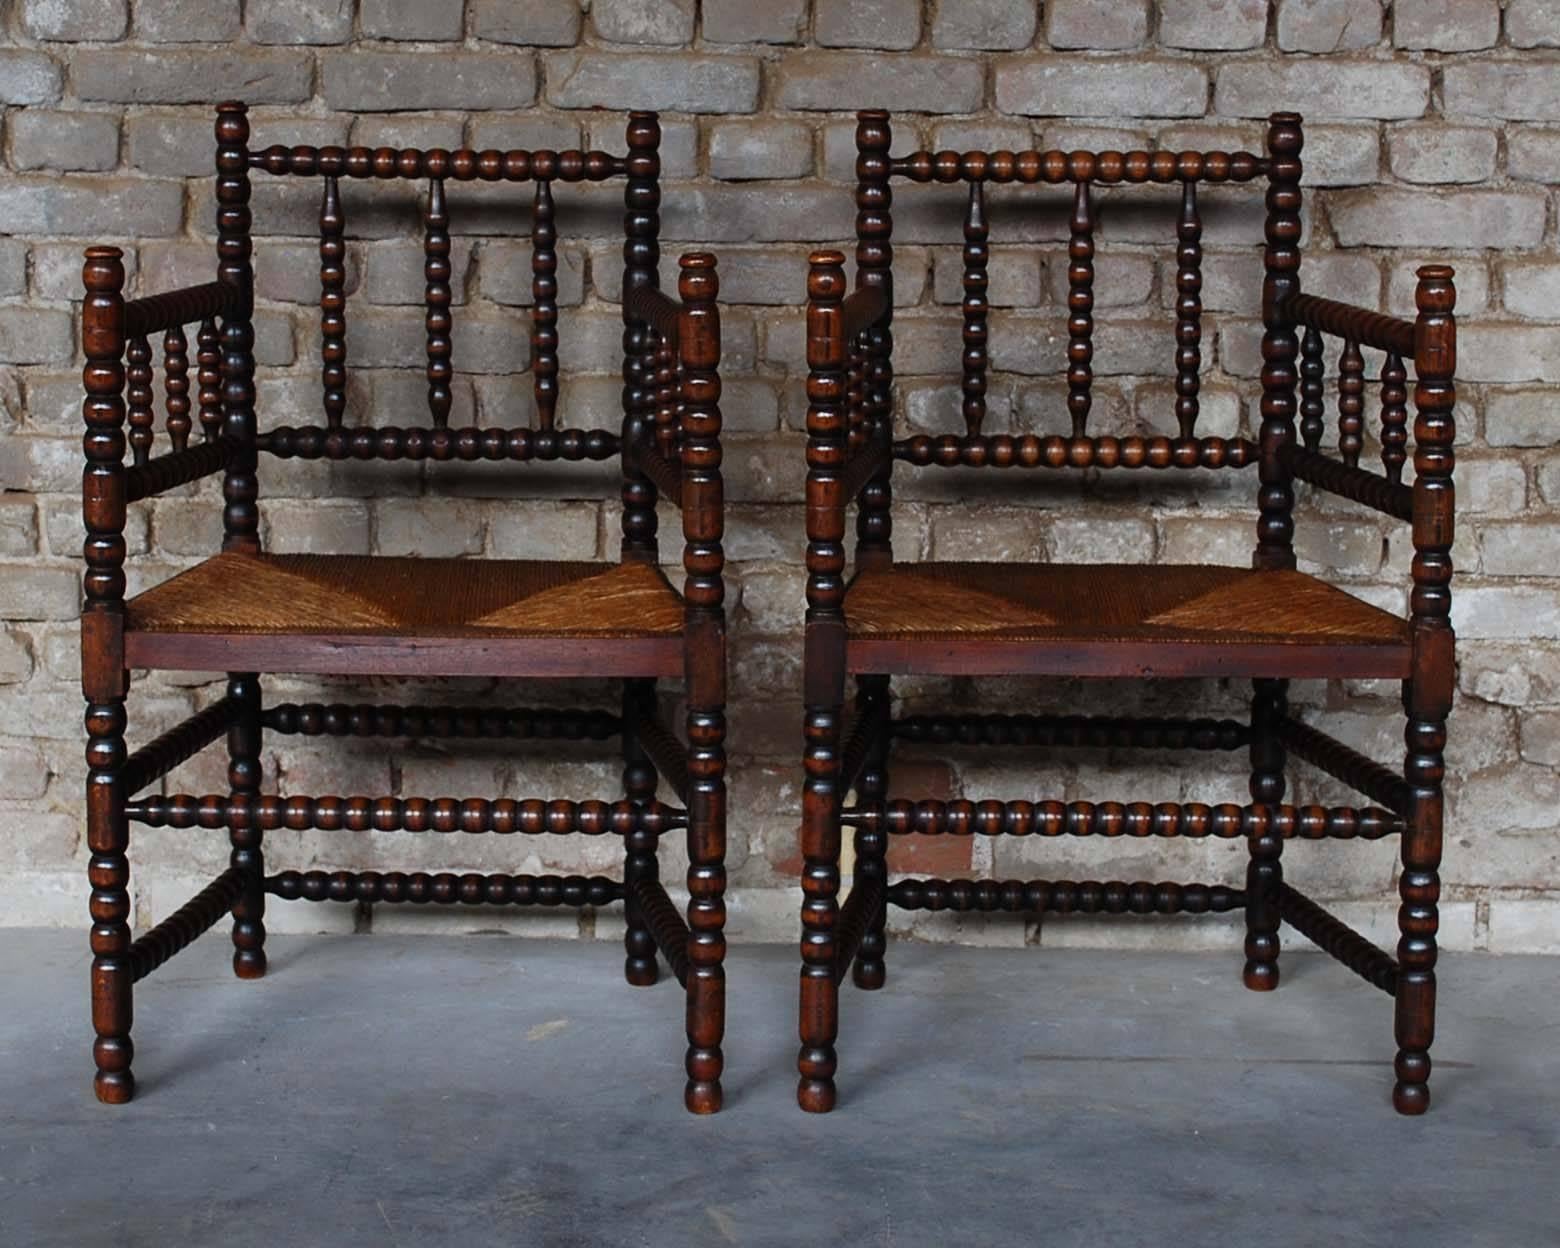 This beautiful pair of Dutch Bobbin chairs were made in the early 1900s.
They originate in the southern part of the Netherlands and they are also known as 'Brabantse knopstoel' or knob chair.
The chairs were made in beechwood and have rush